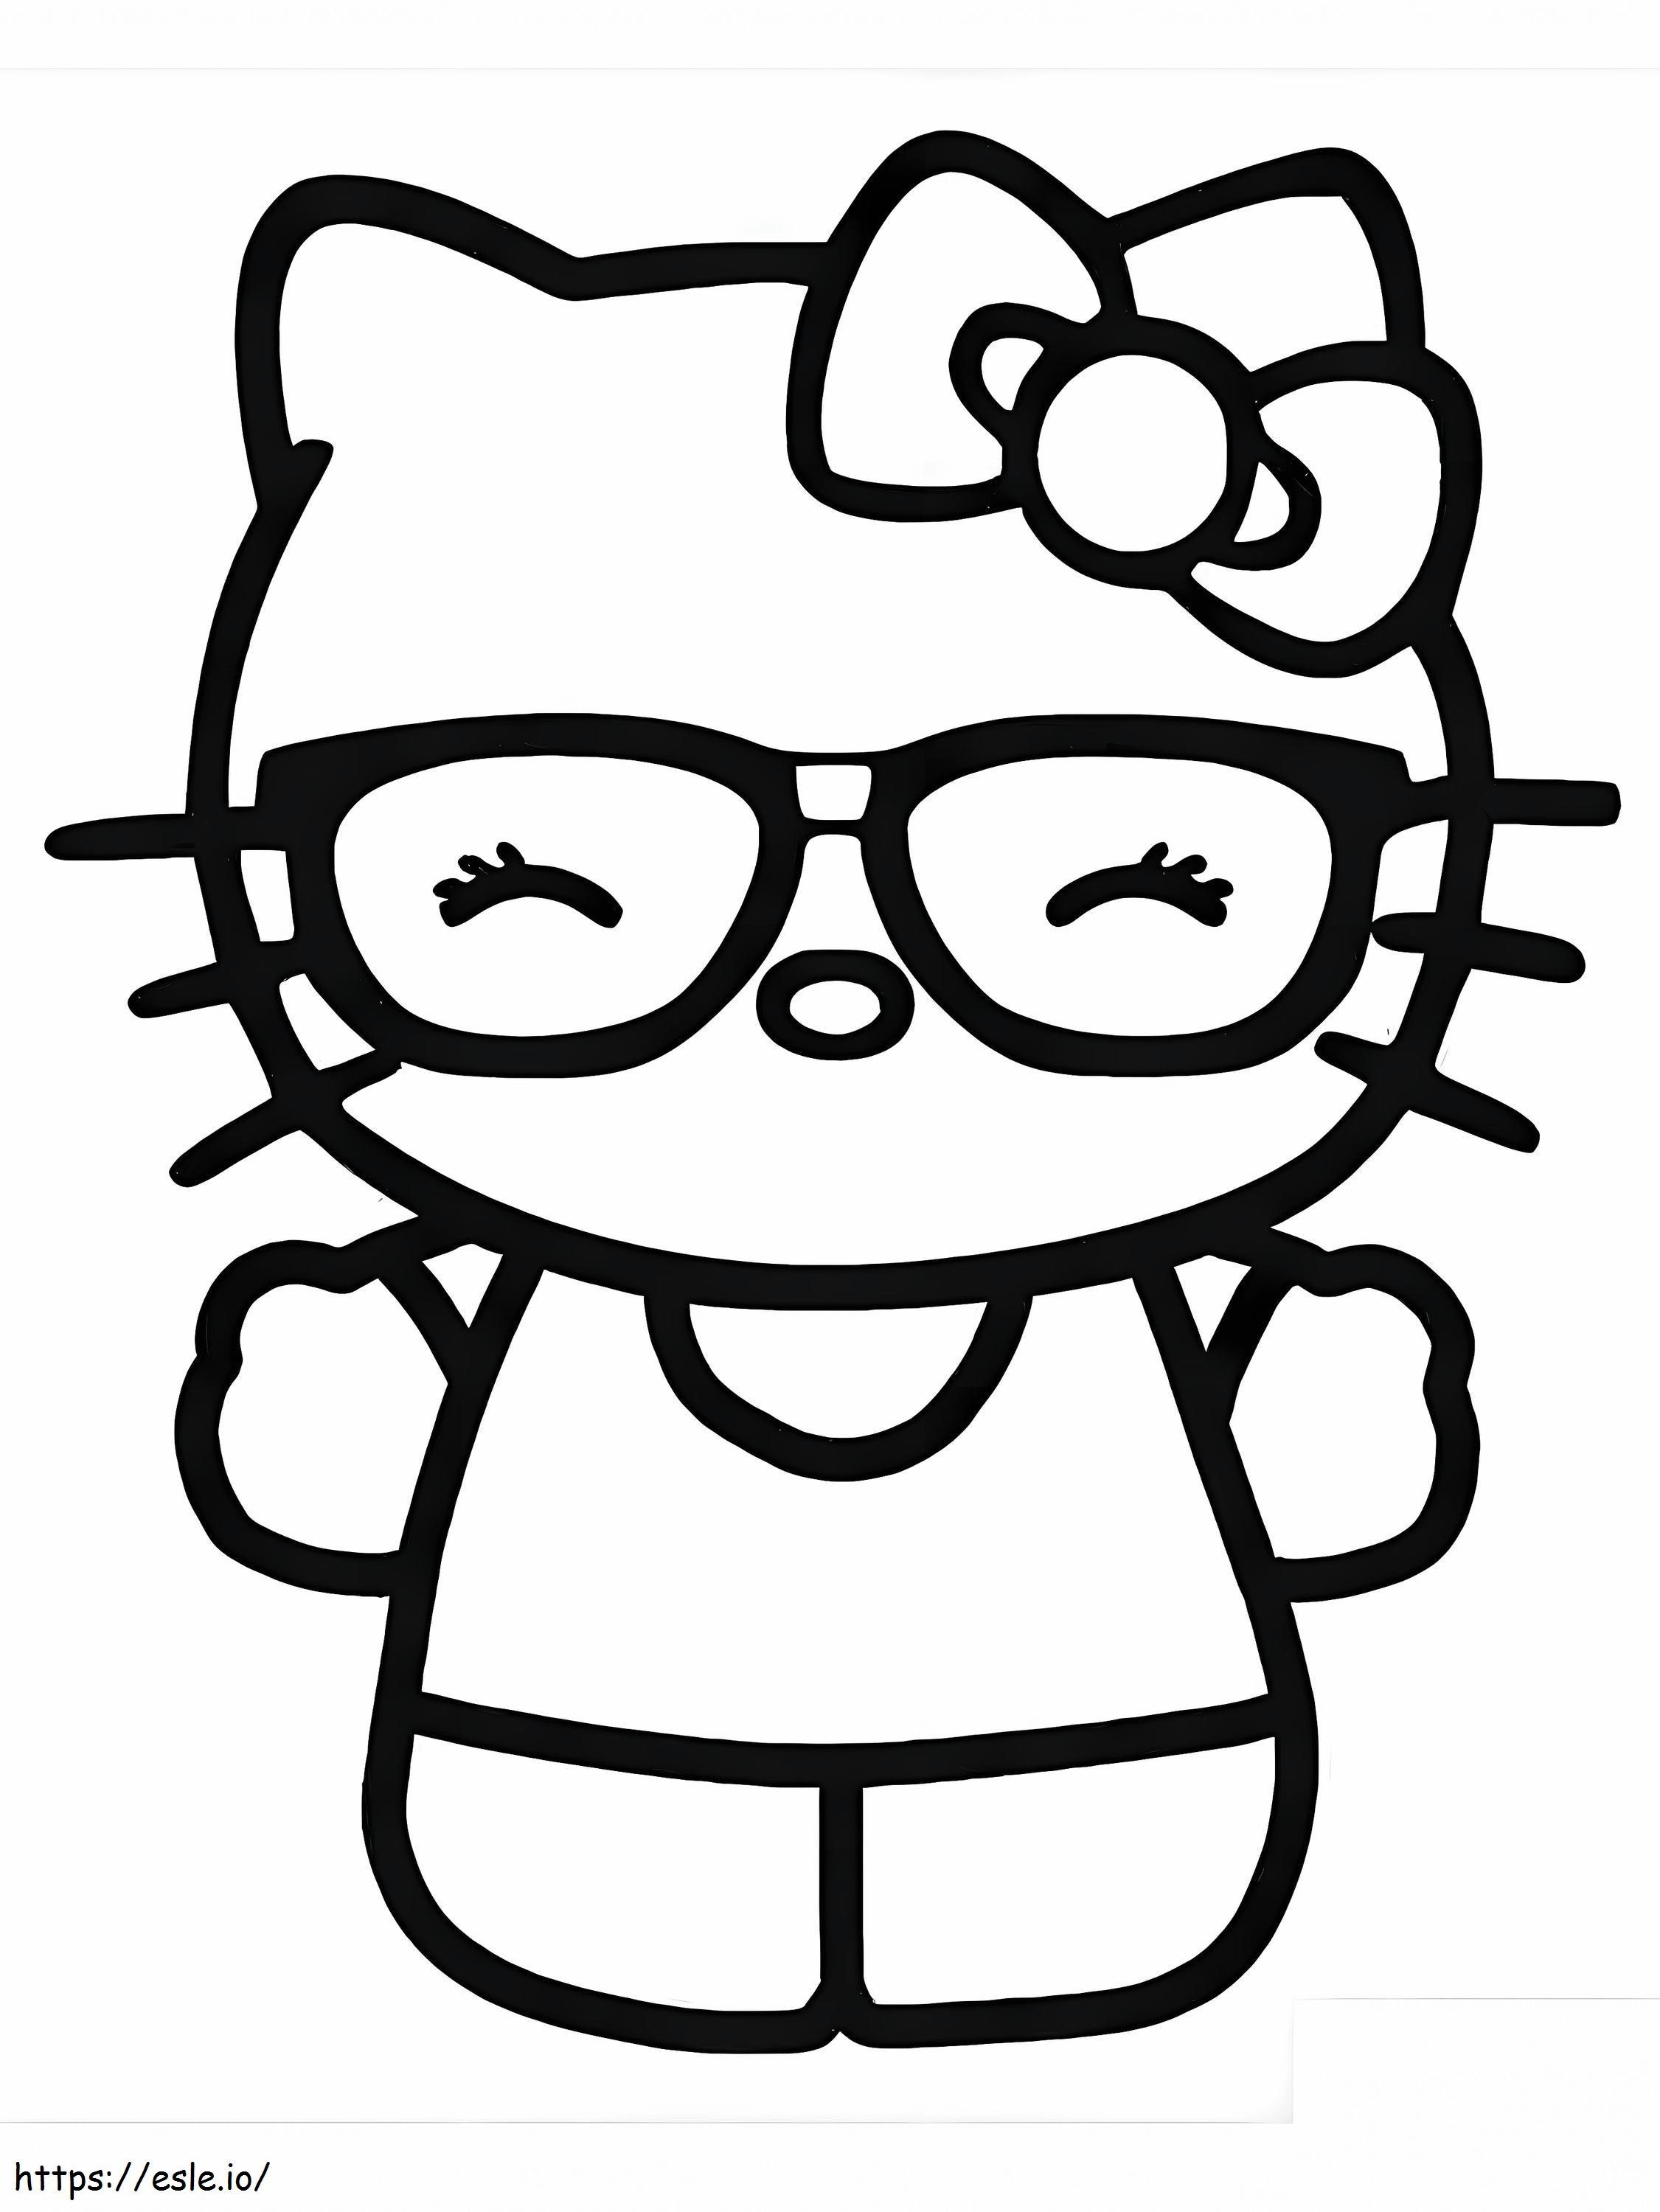 Coloring Pages Kitty Hello Hello Kitty Hello Kitty coloring page